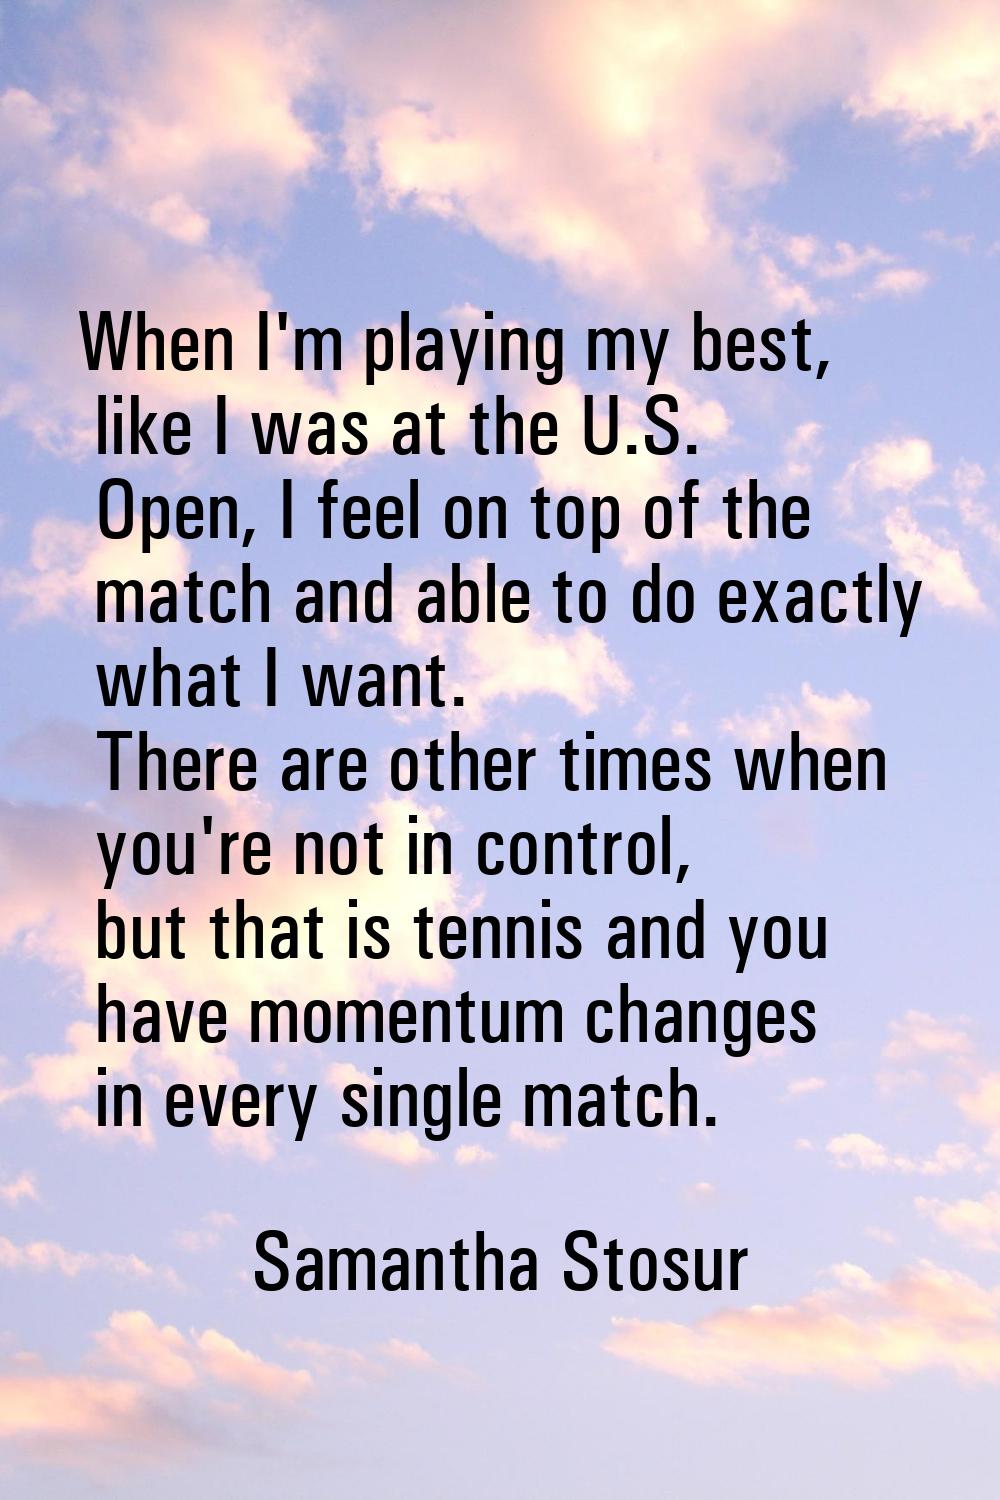 When I'm playing my best, like I was at the U.S. Open, I feel on top of the match and able to do ex